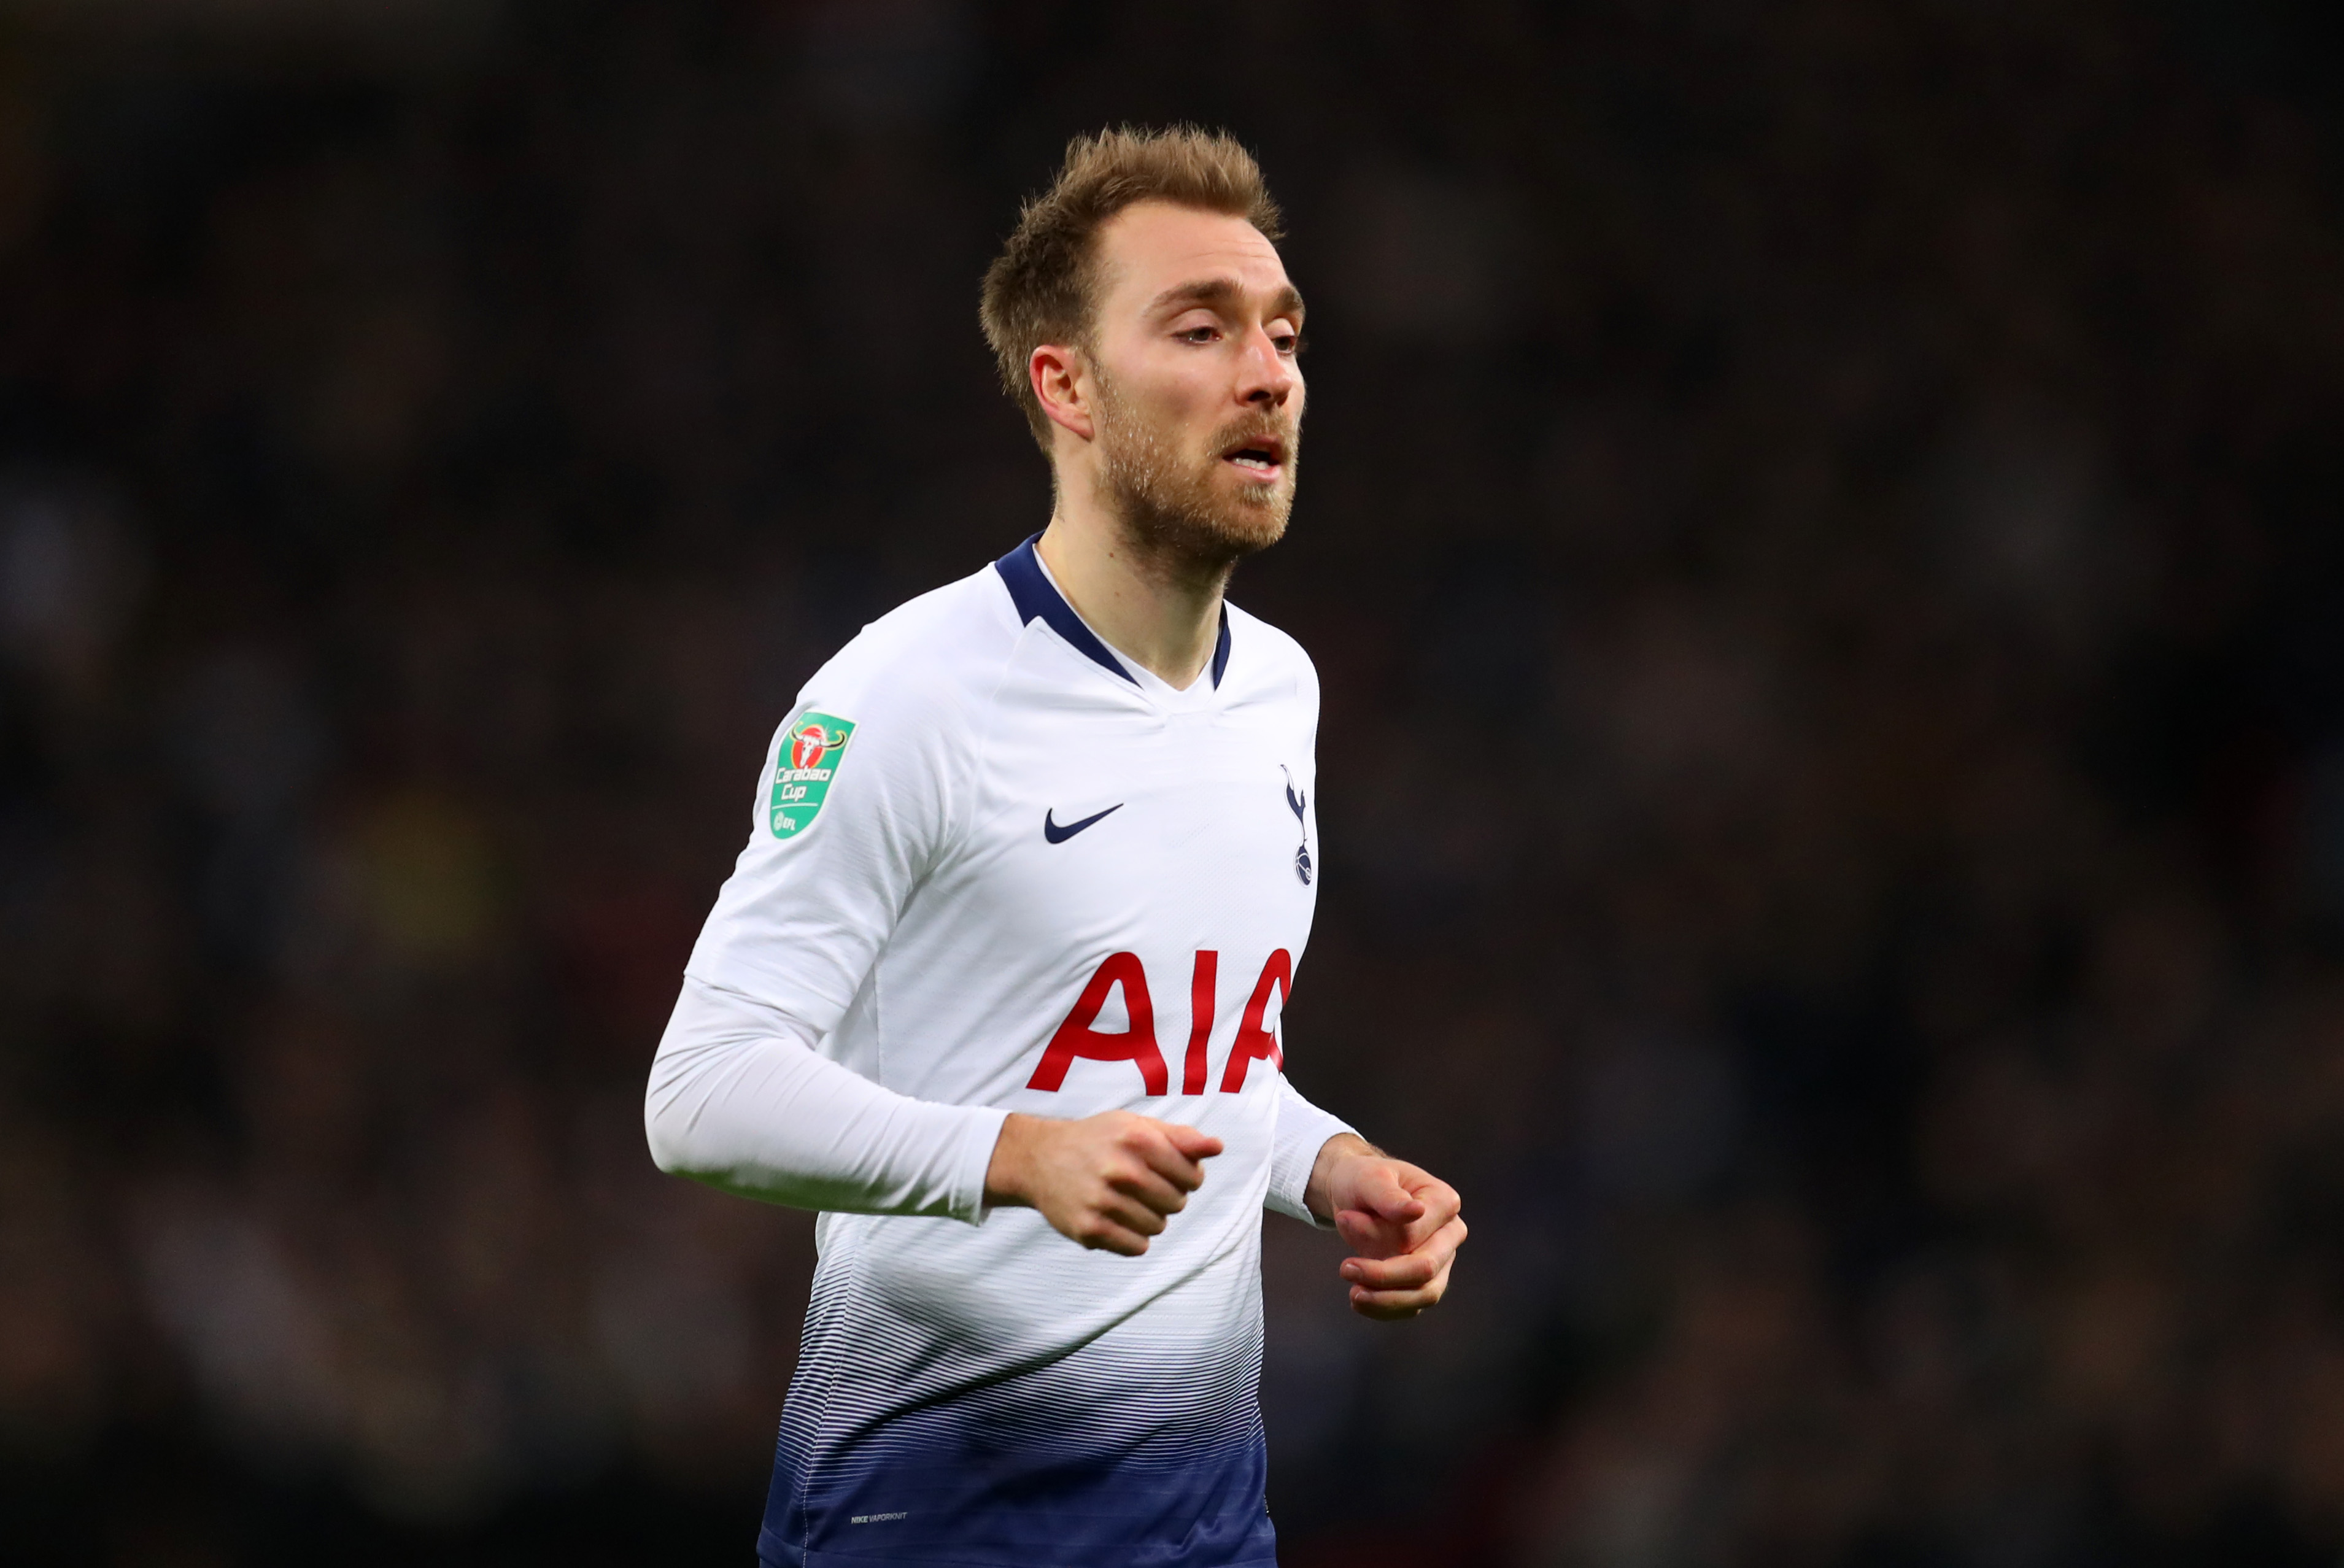 Eriksen among other stars is set for a returninto the starting lineup against Watford. (Photo courtesy: AFP/Getty)